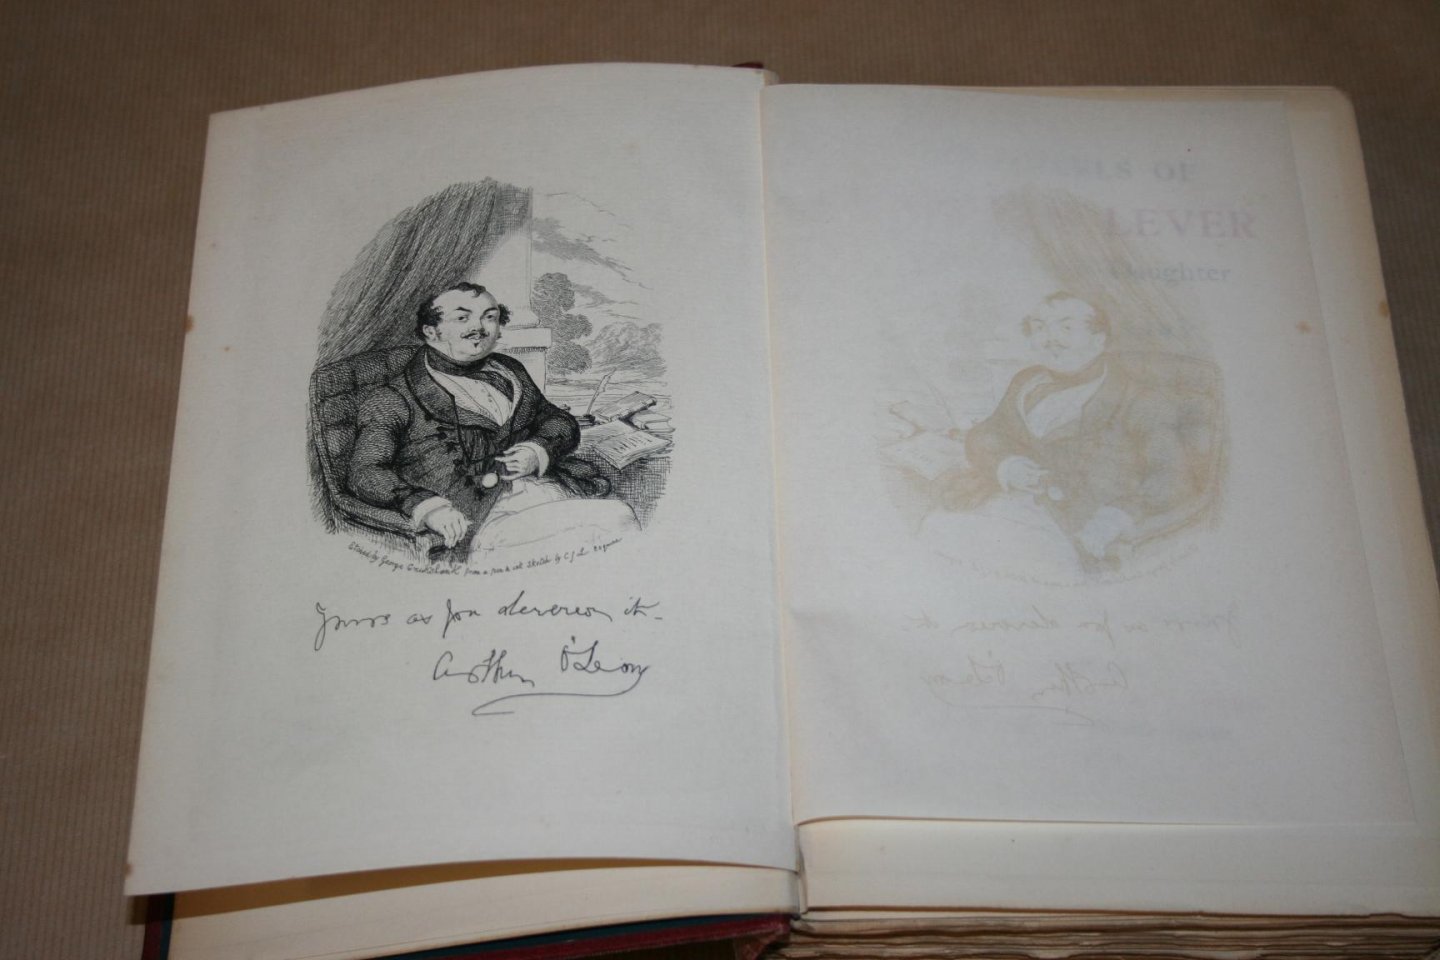 Charles Lever & George Cruikshank - The novels of Charles Lever -- Arthur O'Leary His wanderings and ponderings in many lands  -- 10 etchings by George Cruikshank